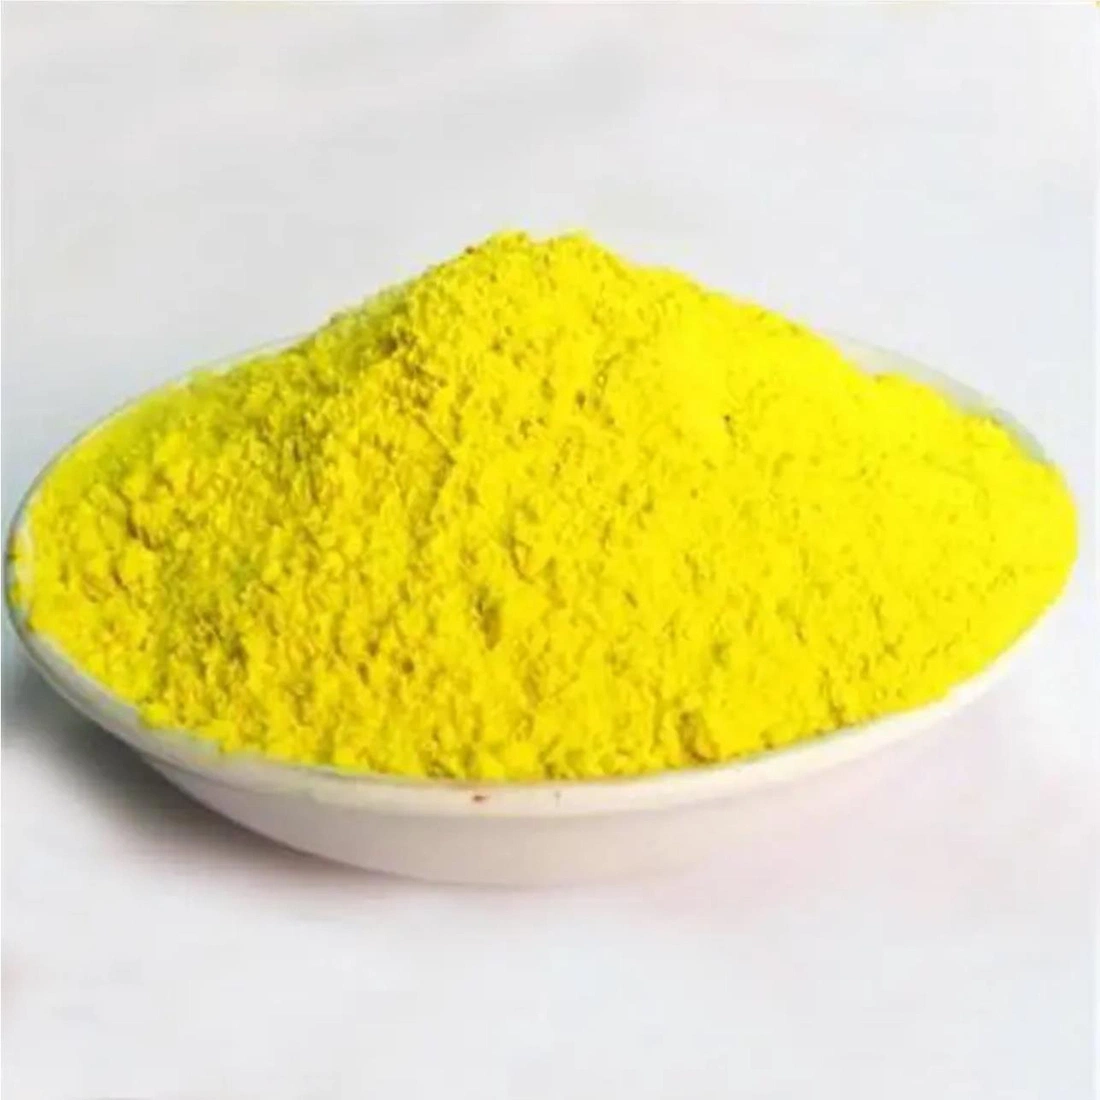 Assay Grade Litharge/Lead Oxide for Laboratory Testing Precious Metal Using